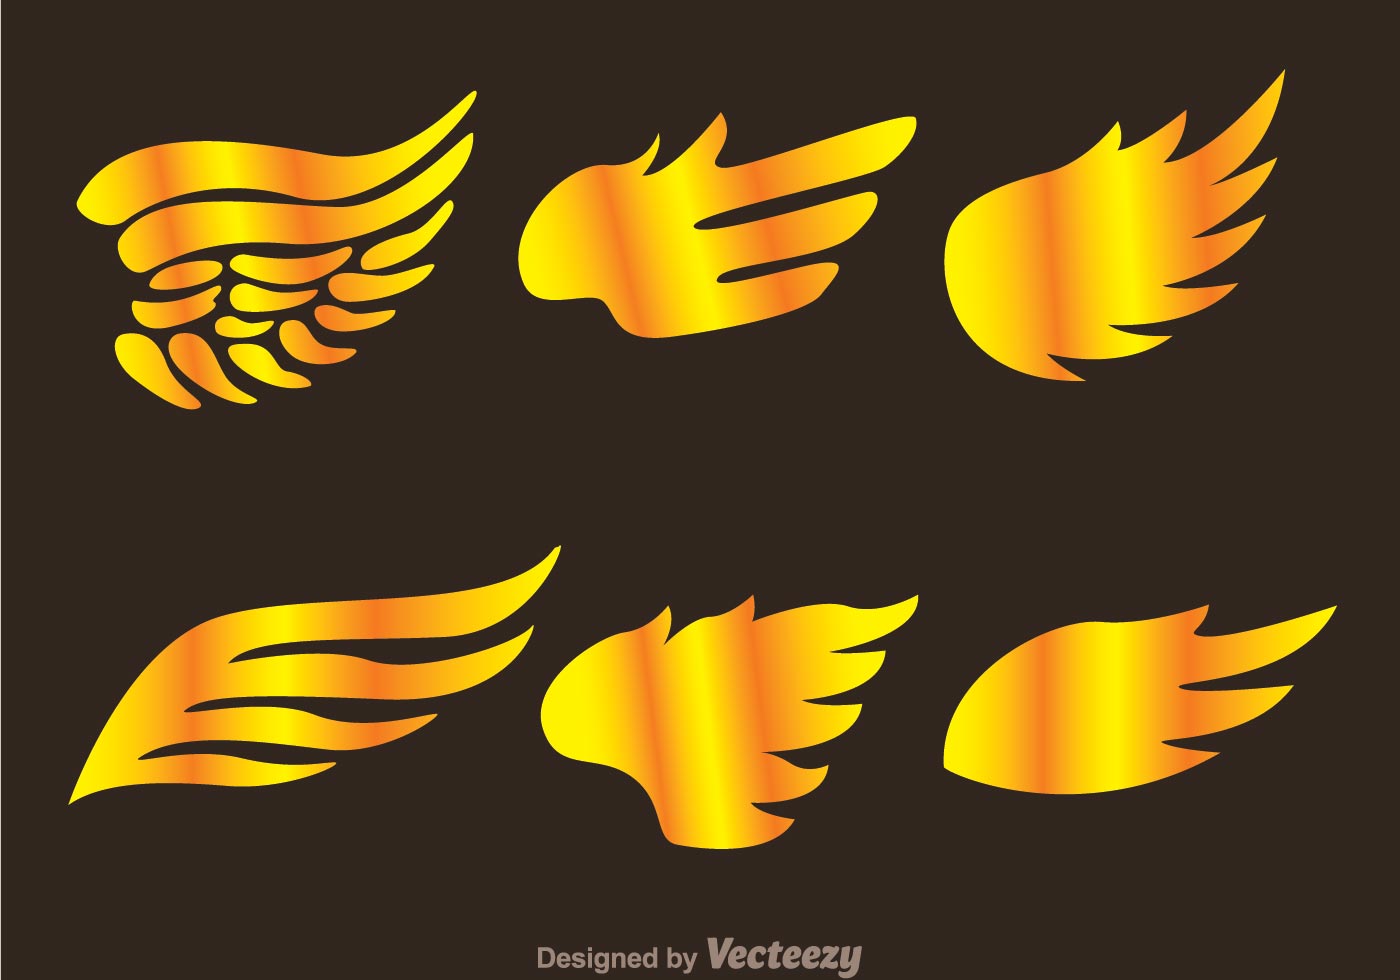 Eagle Wings Free Vector Art - (1566 Free Downloads)